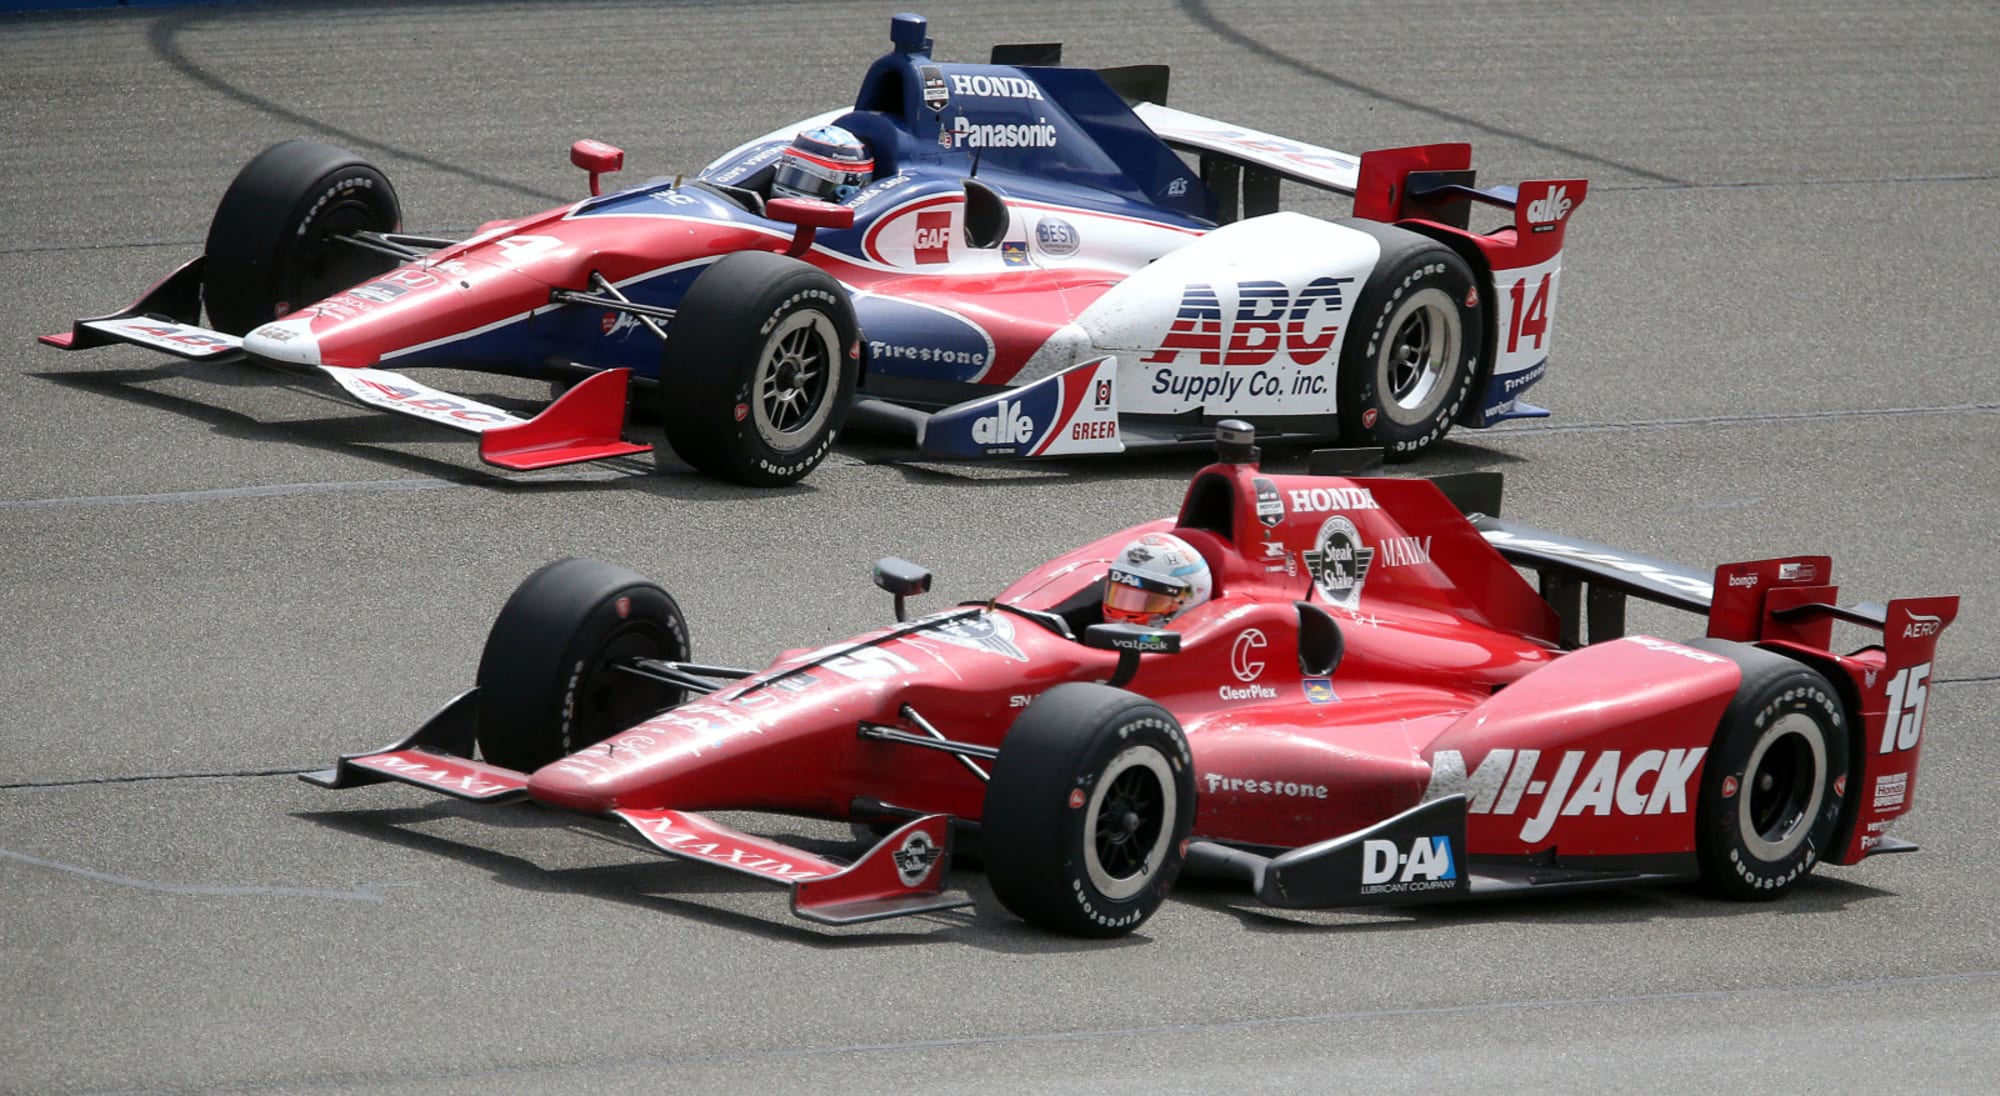 IndyCar What is the alltime record for lead changes in a race?